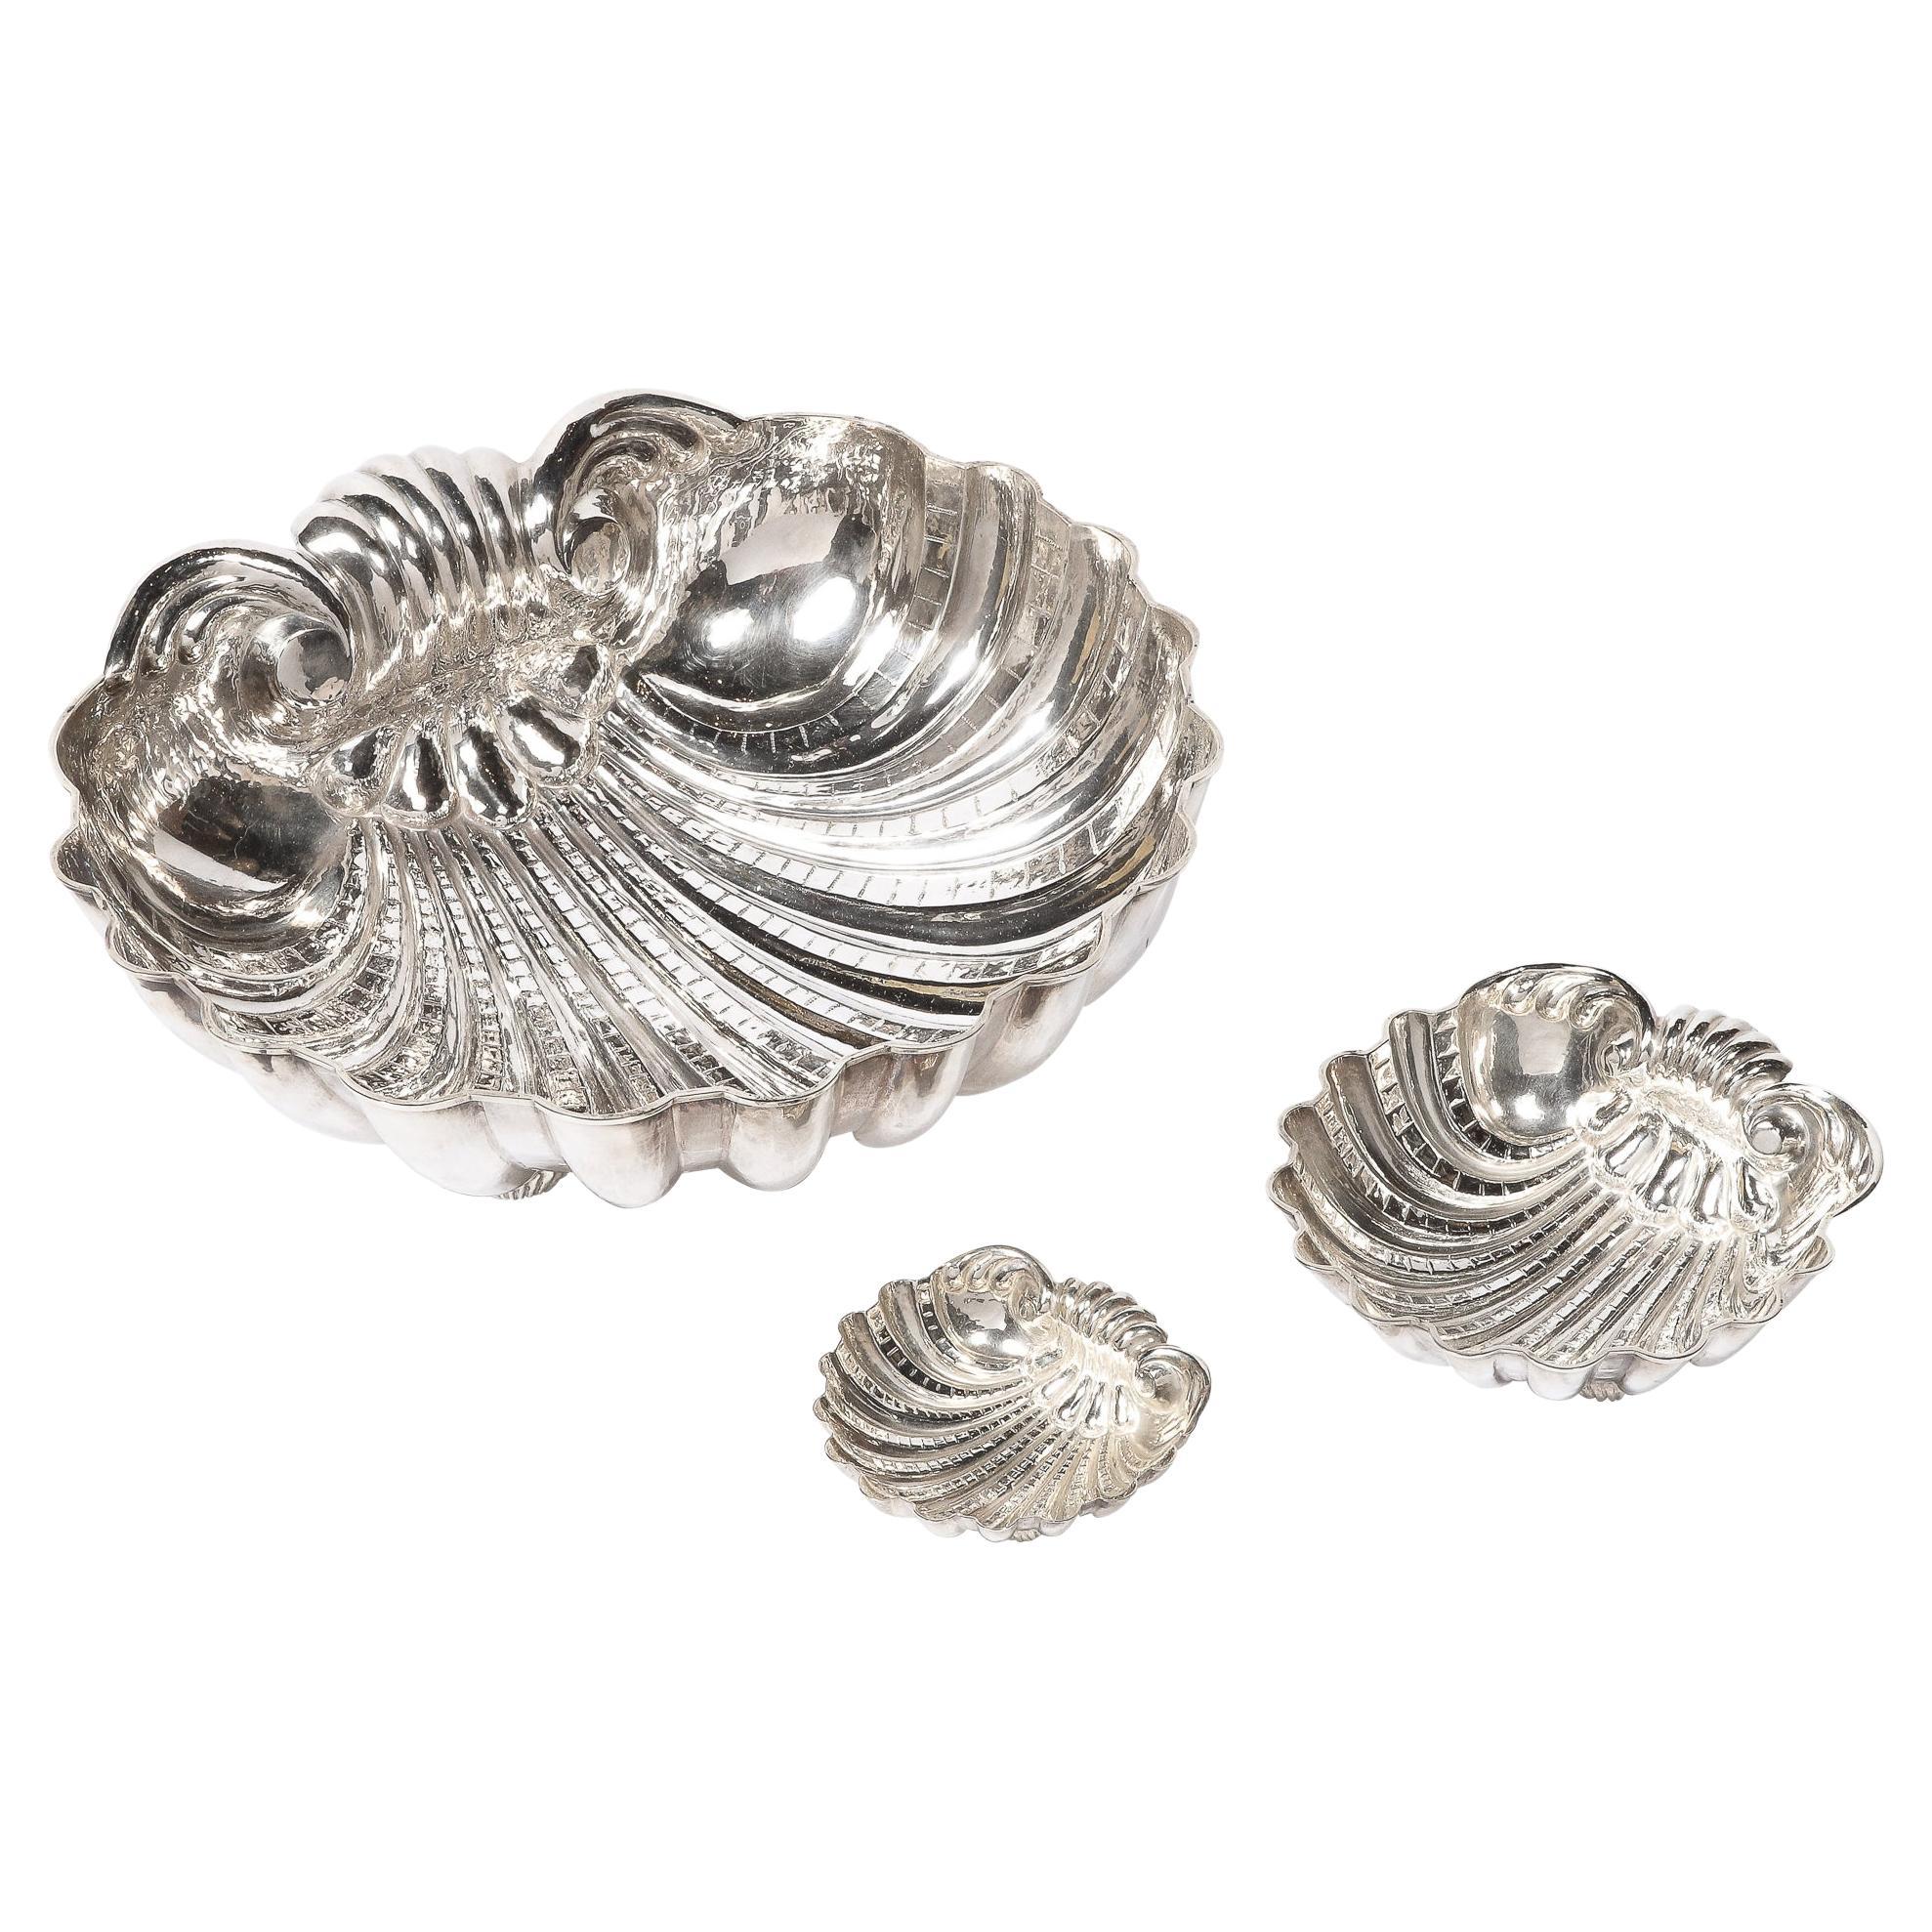 Three Hand-Wrought Sterling Silver Scallop Form Bowls Signed by Missiaglia For Sale